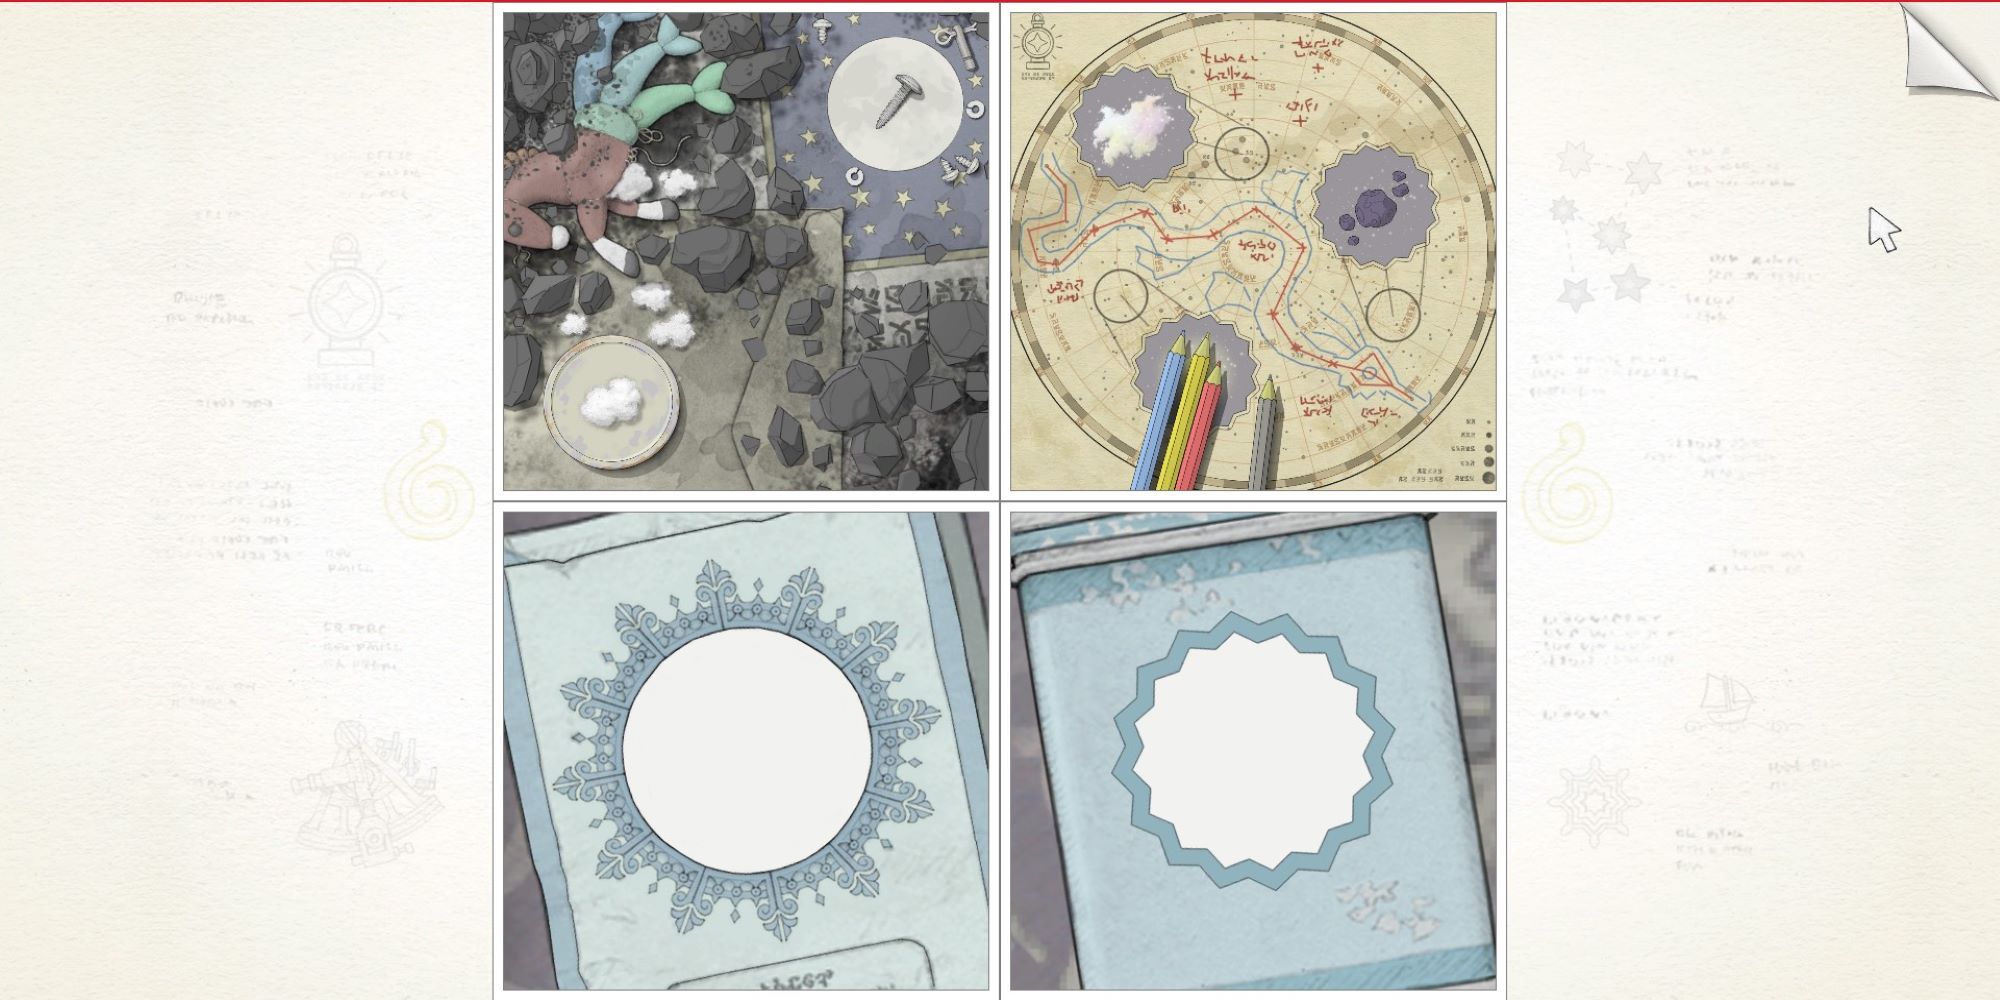 Two box labels and their puzzles in Chapter Three of Gorogoa.